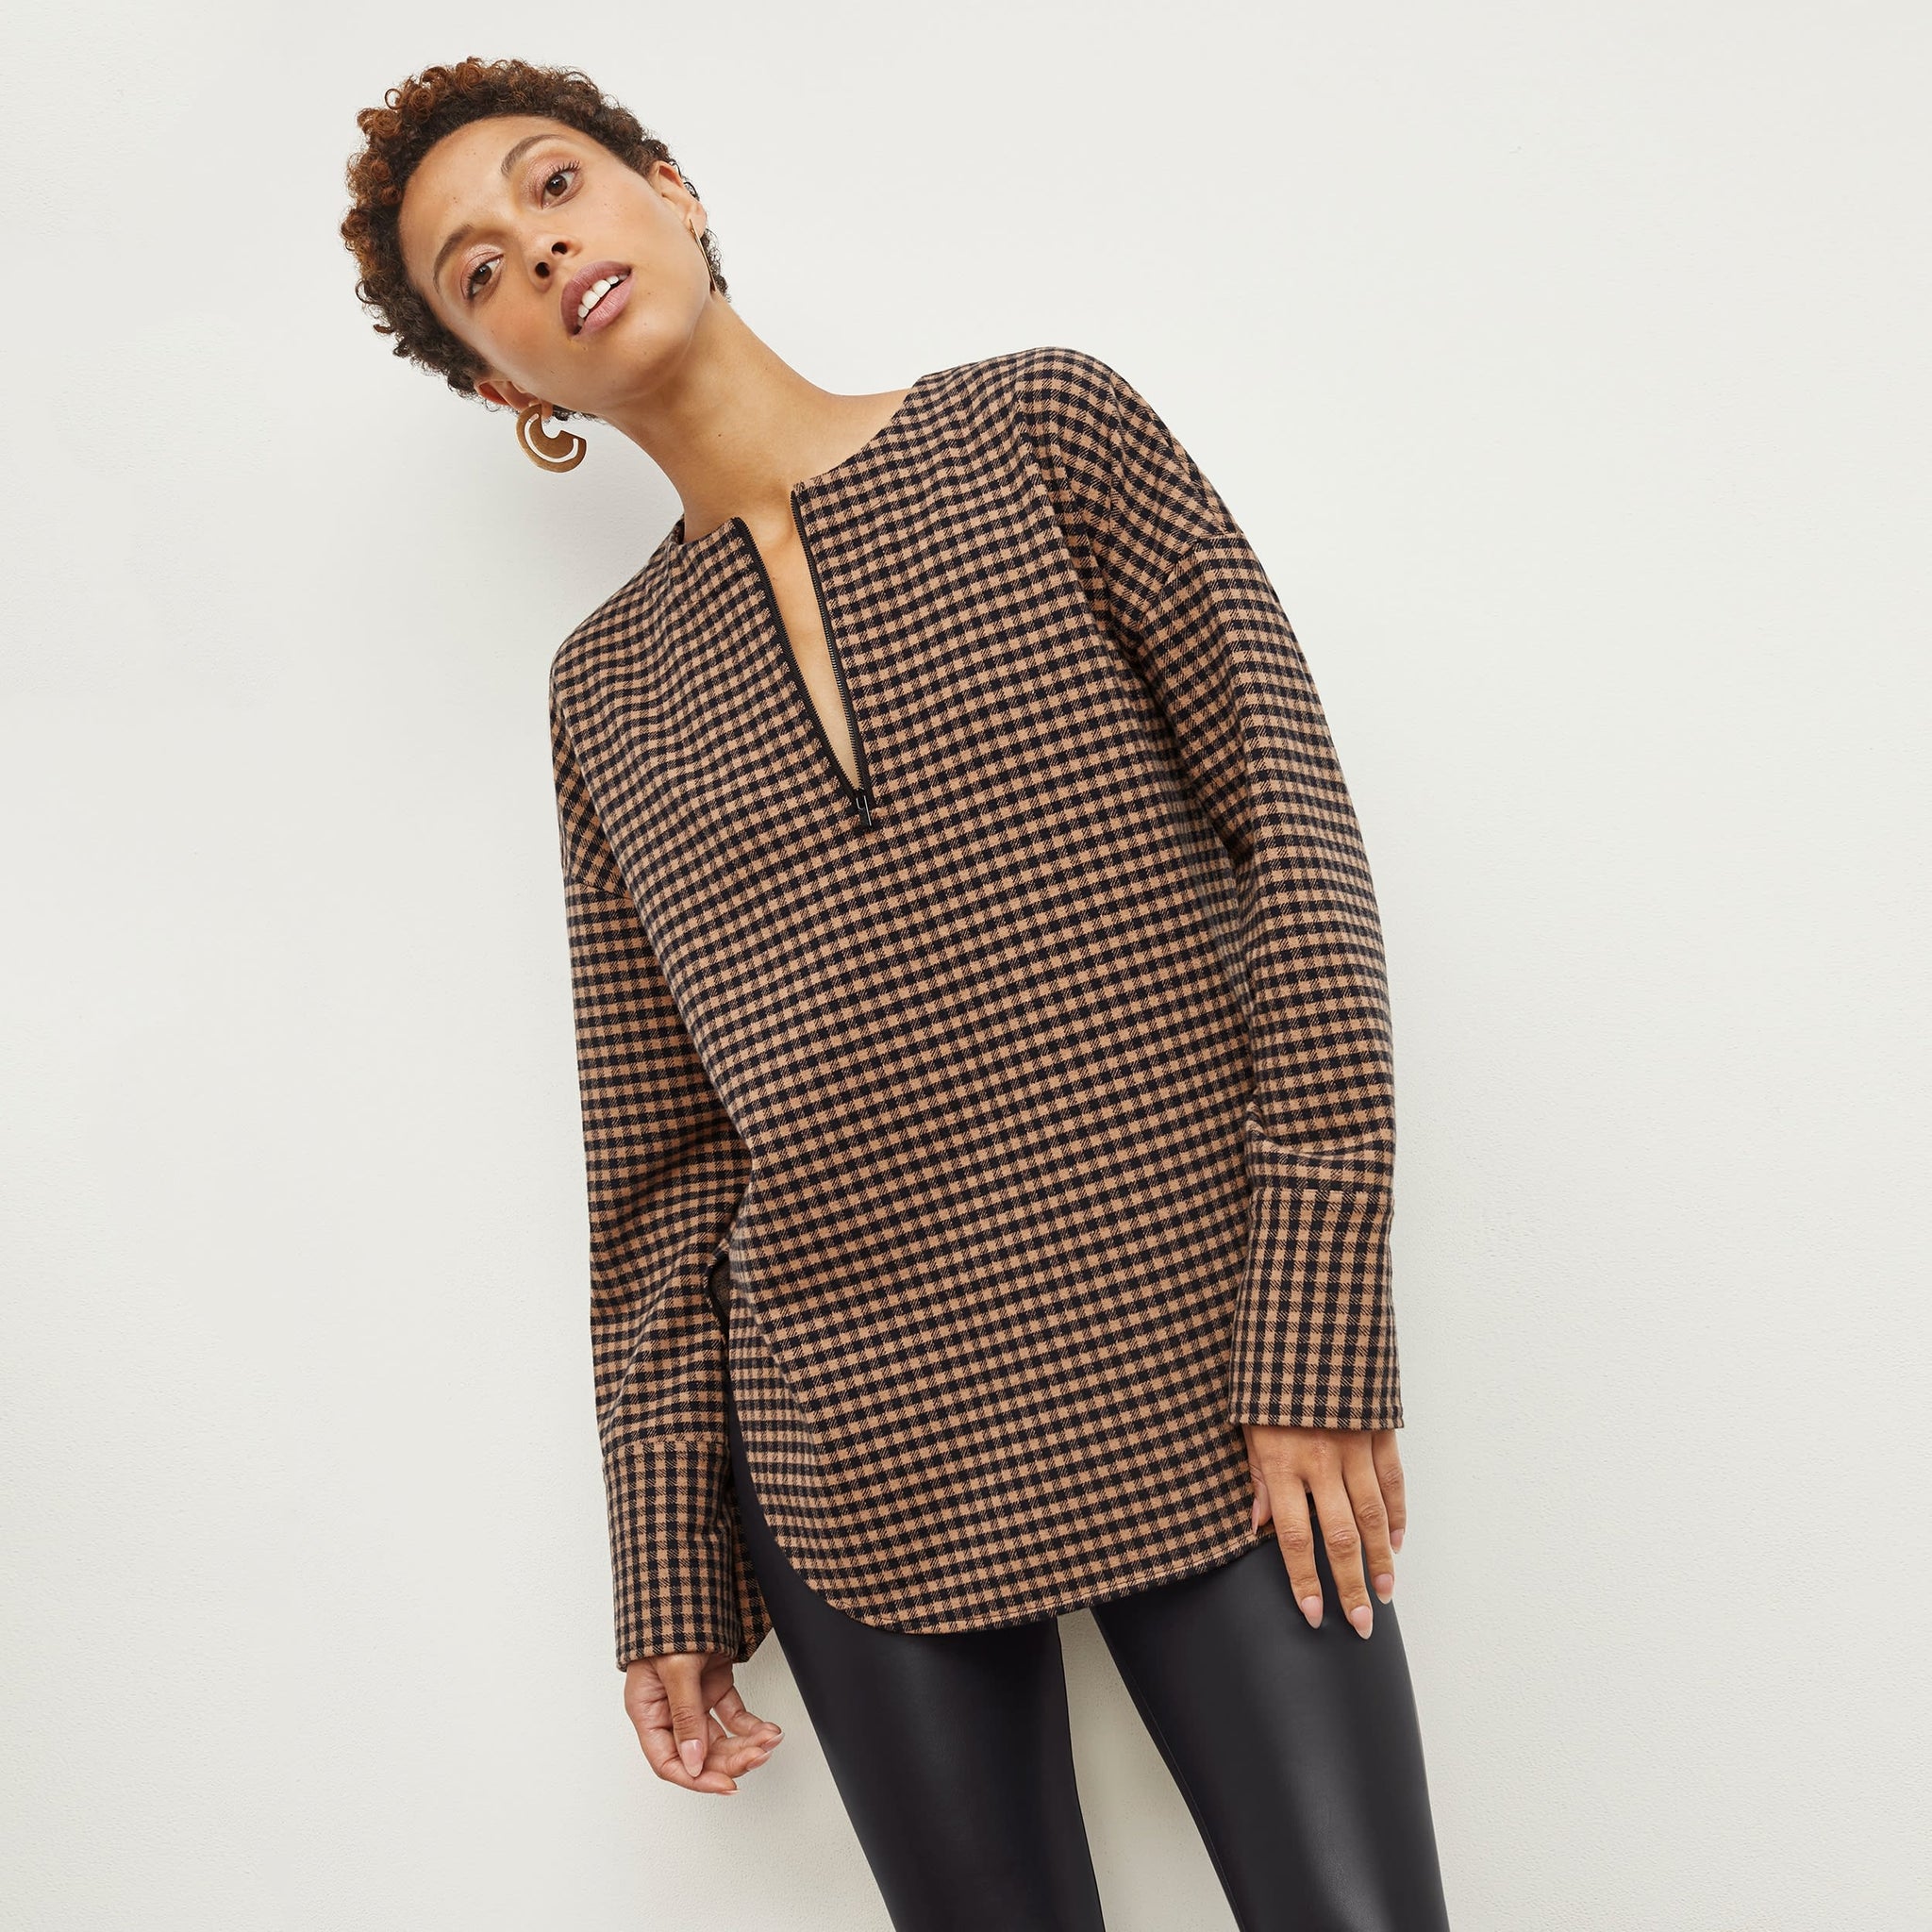 Front image of a woman standing wearing the Tully Top—Plaid Knit in Camel / Black